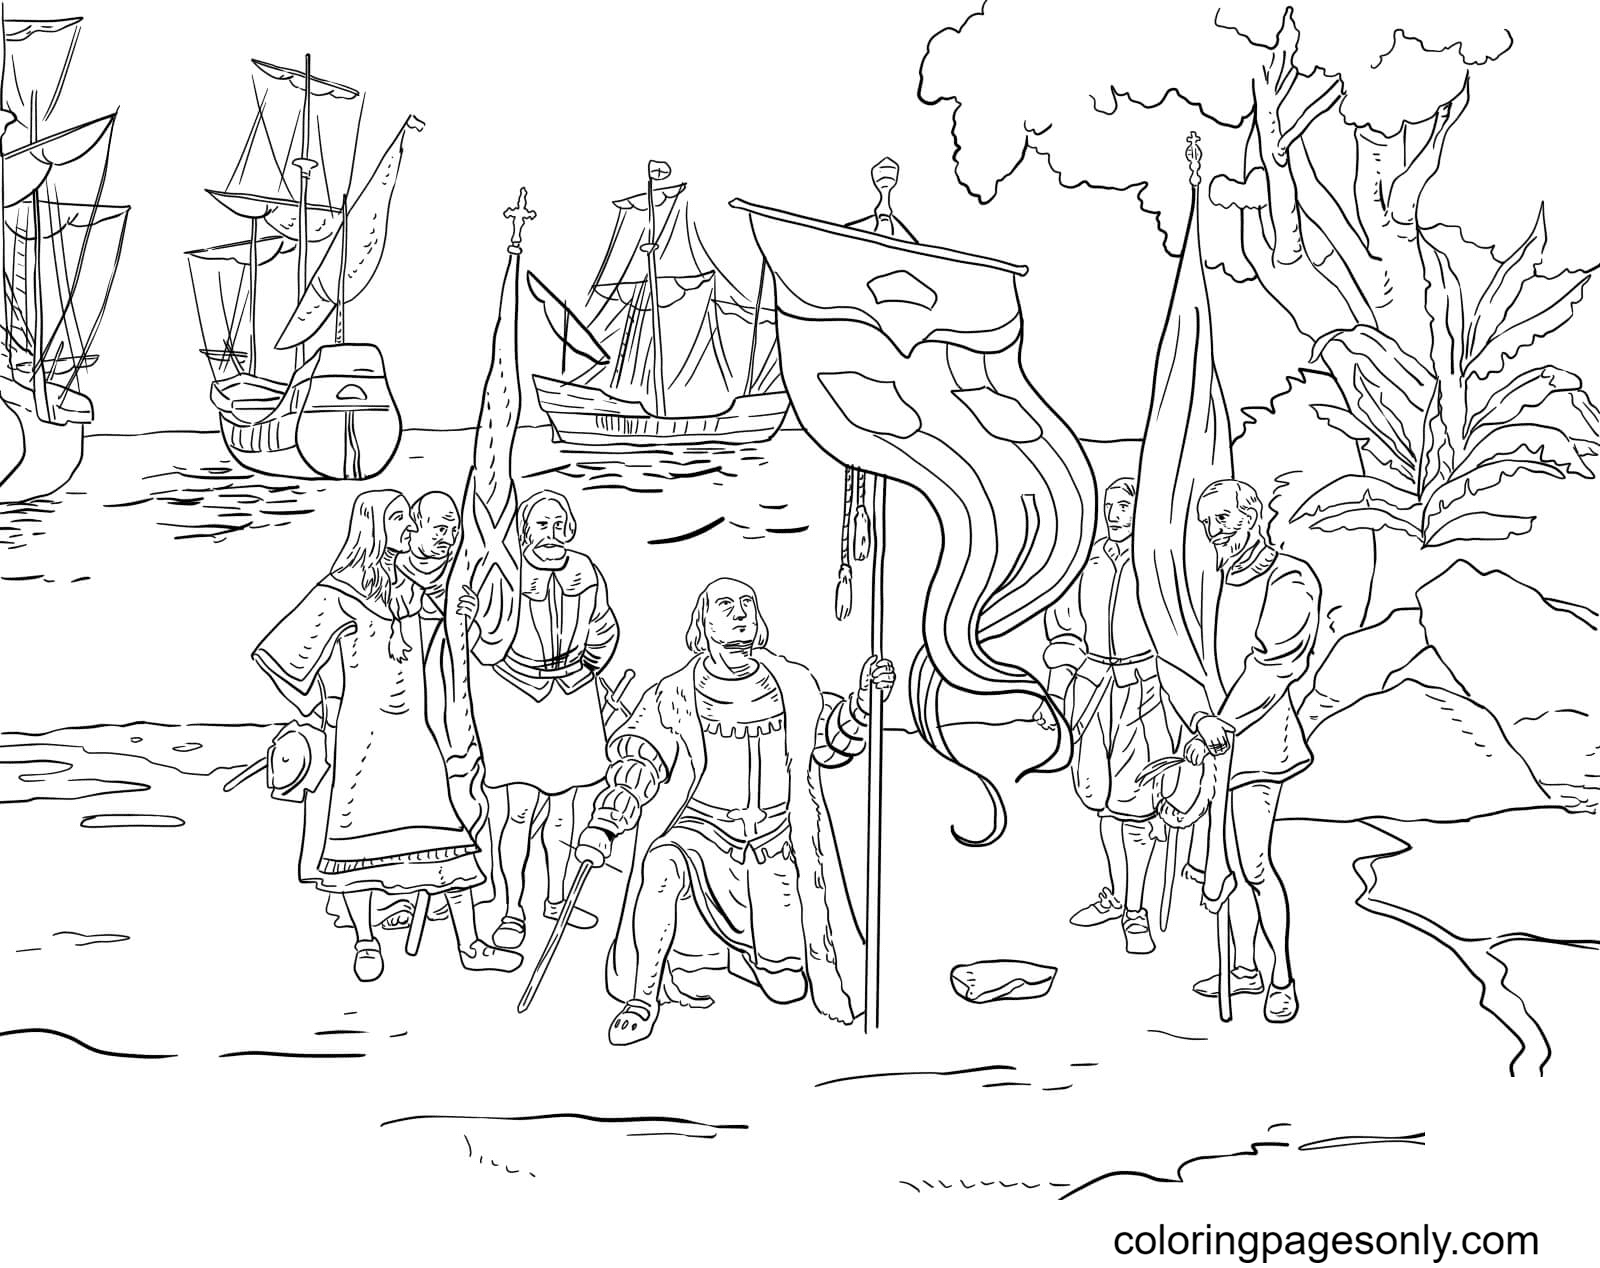 Columbus Taking Possession Coloring Page